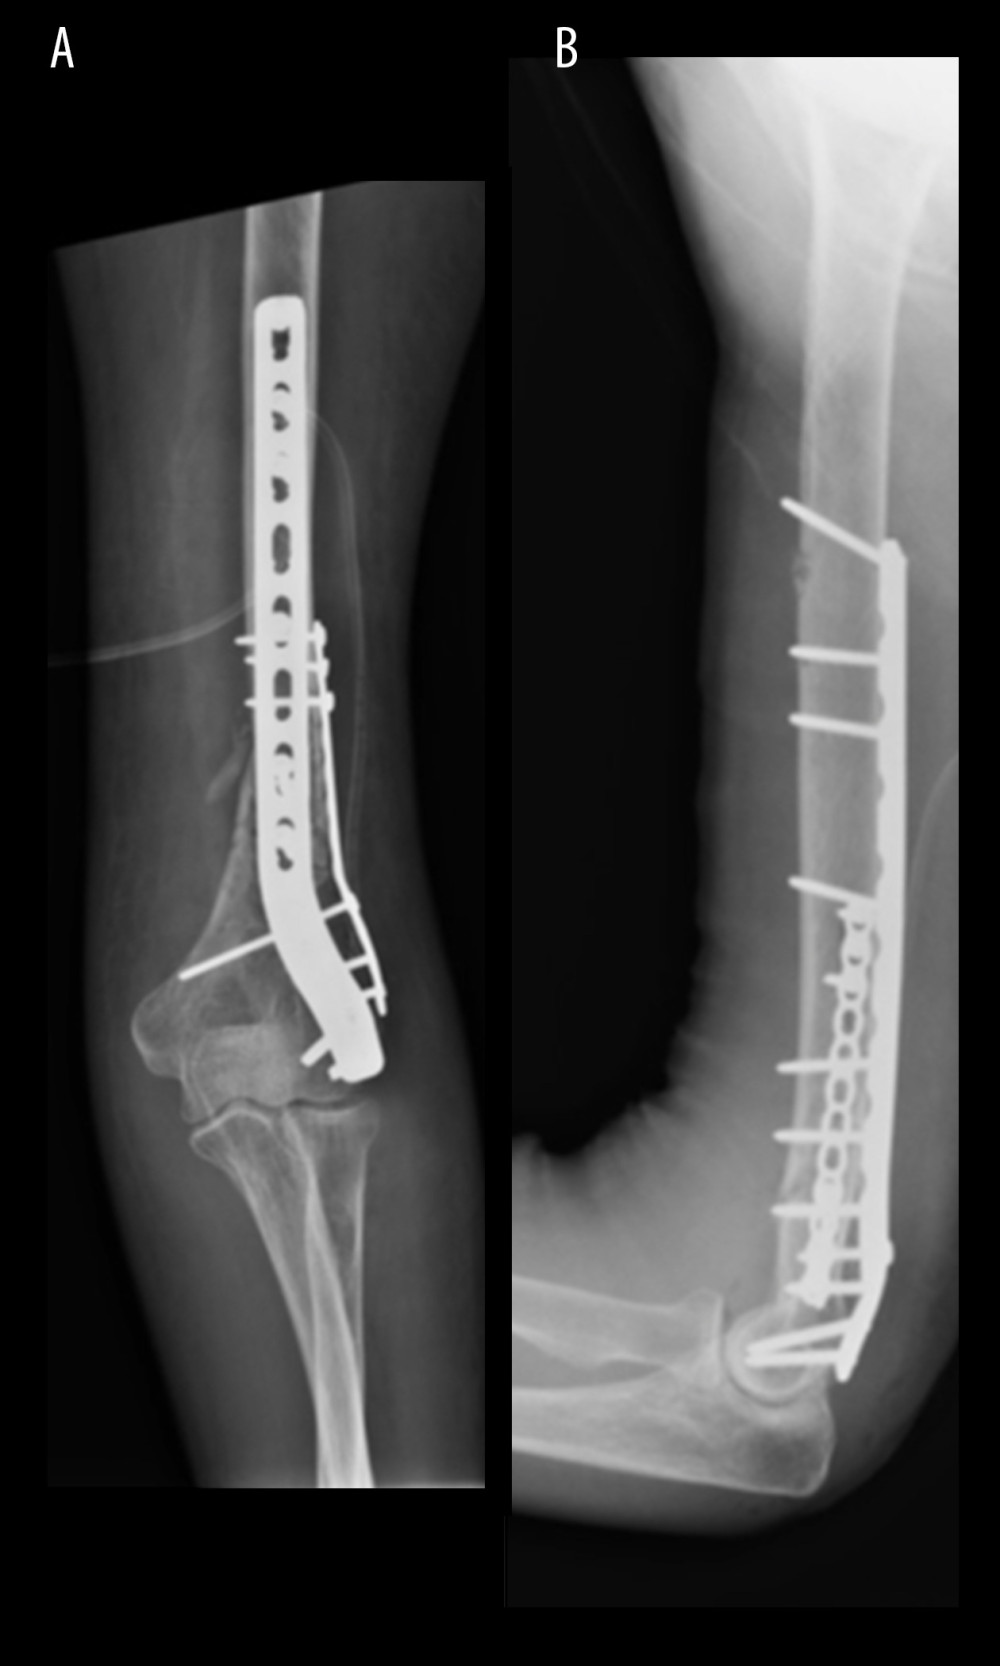 Postoperative radiographs showing anterior-posterior (A) and lateral (B) views of initial ORIF.